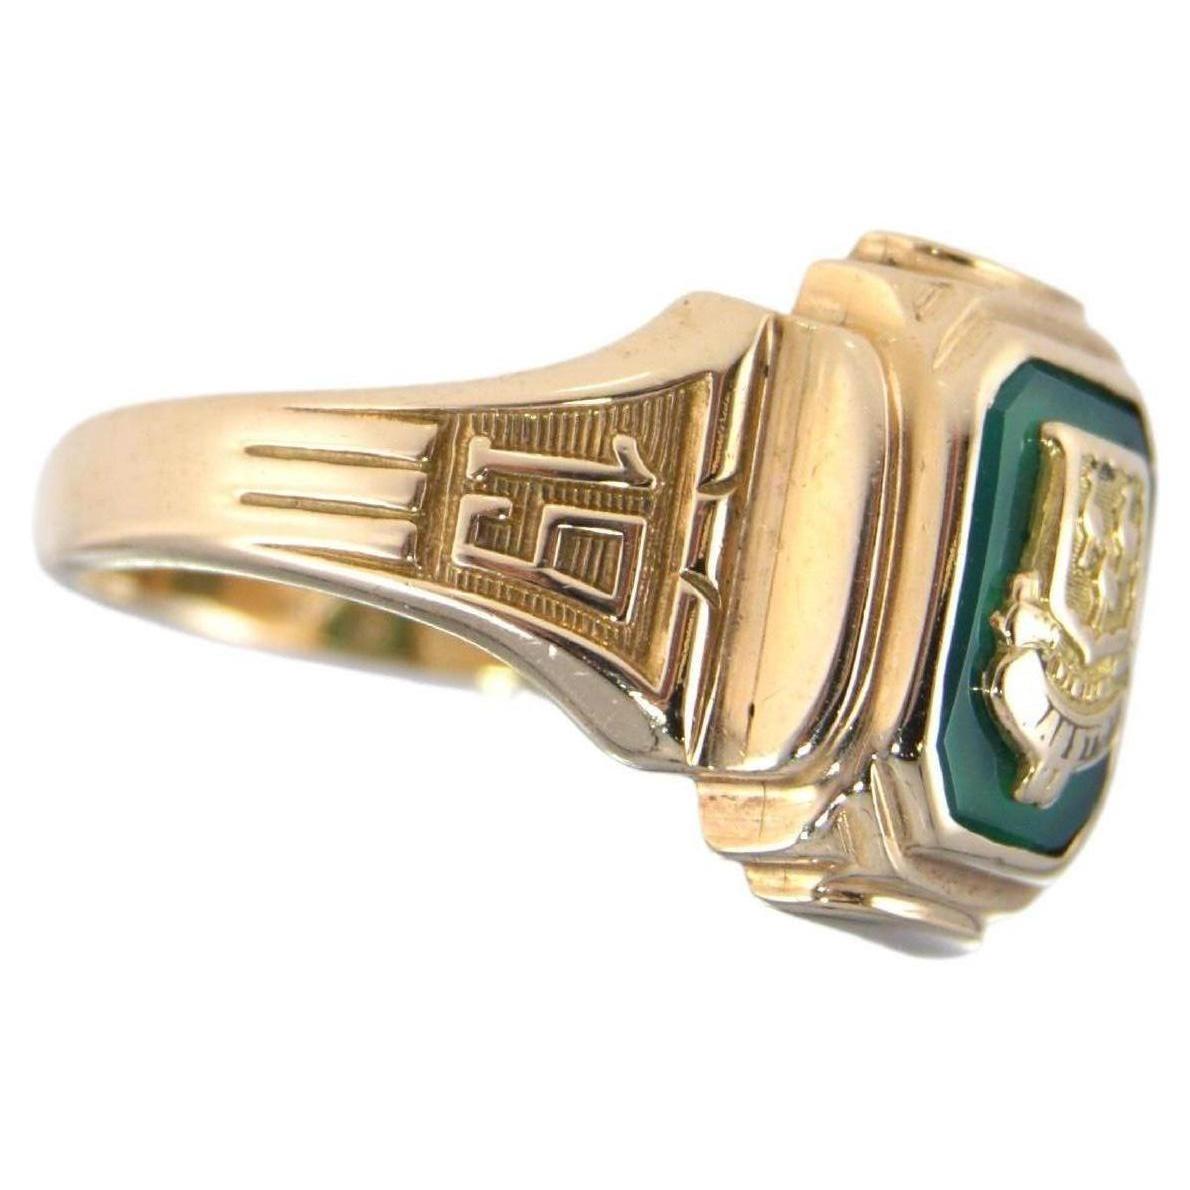 Unisex Art Deco Signet Ring in 10 Karat Solid Gold with Gold Inset from 1953 For Sale 2